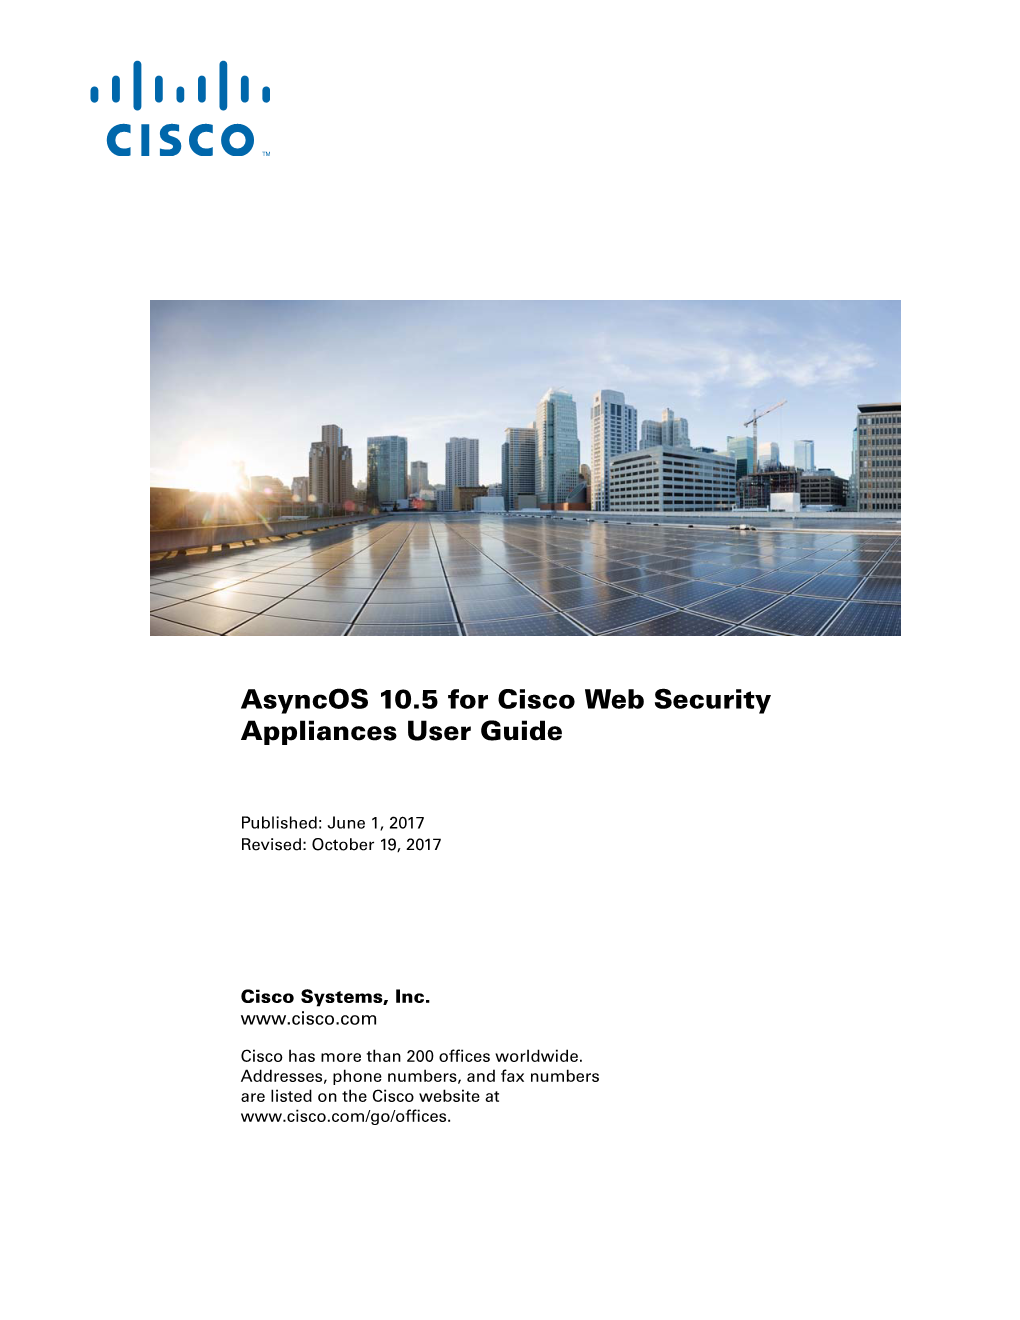 User Guide for Asyncos 10.5.1 for Cisco Web Security Appliances